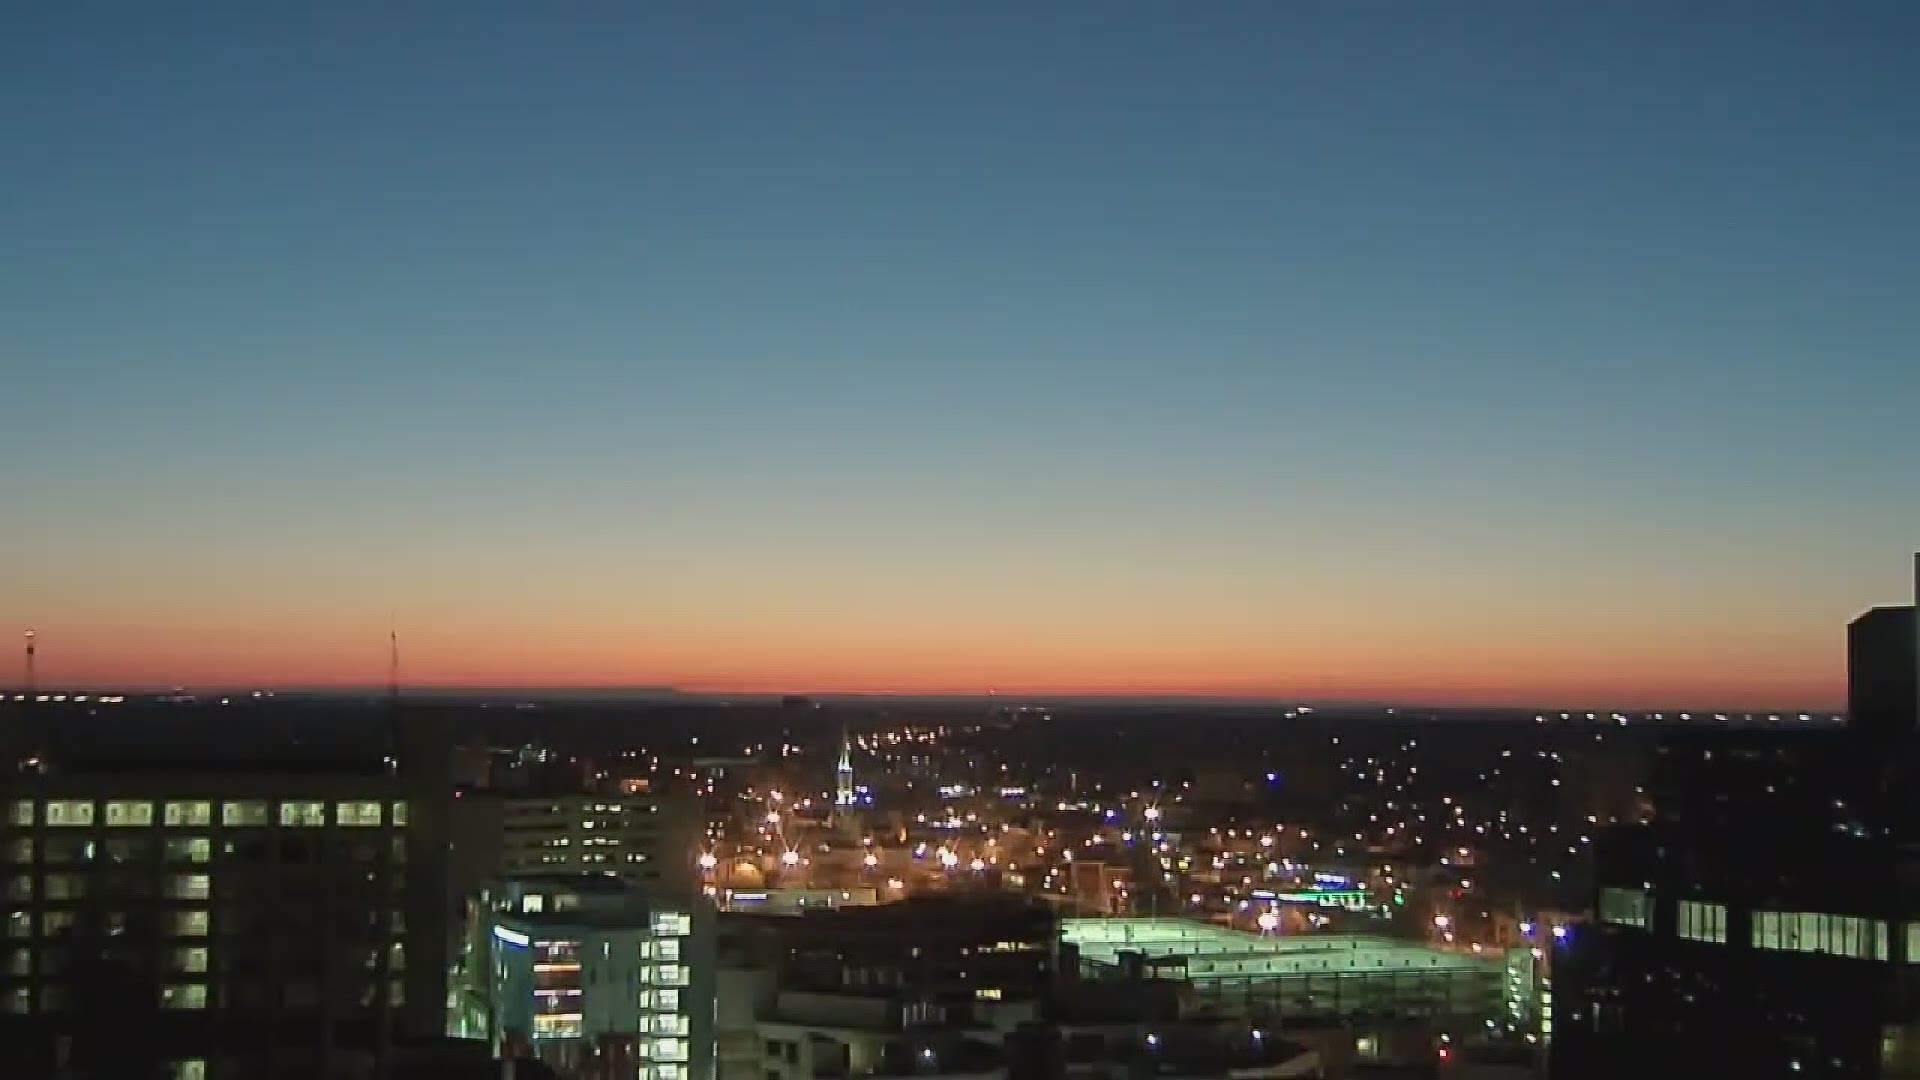 WHAS11's Weather Team captures time lapses of both the first sunrise and sunset of 2020